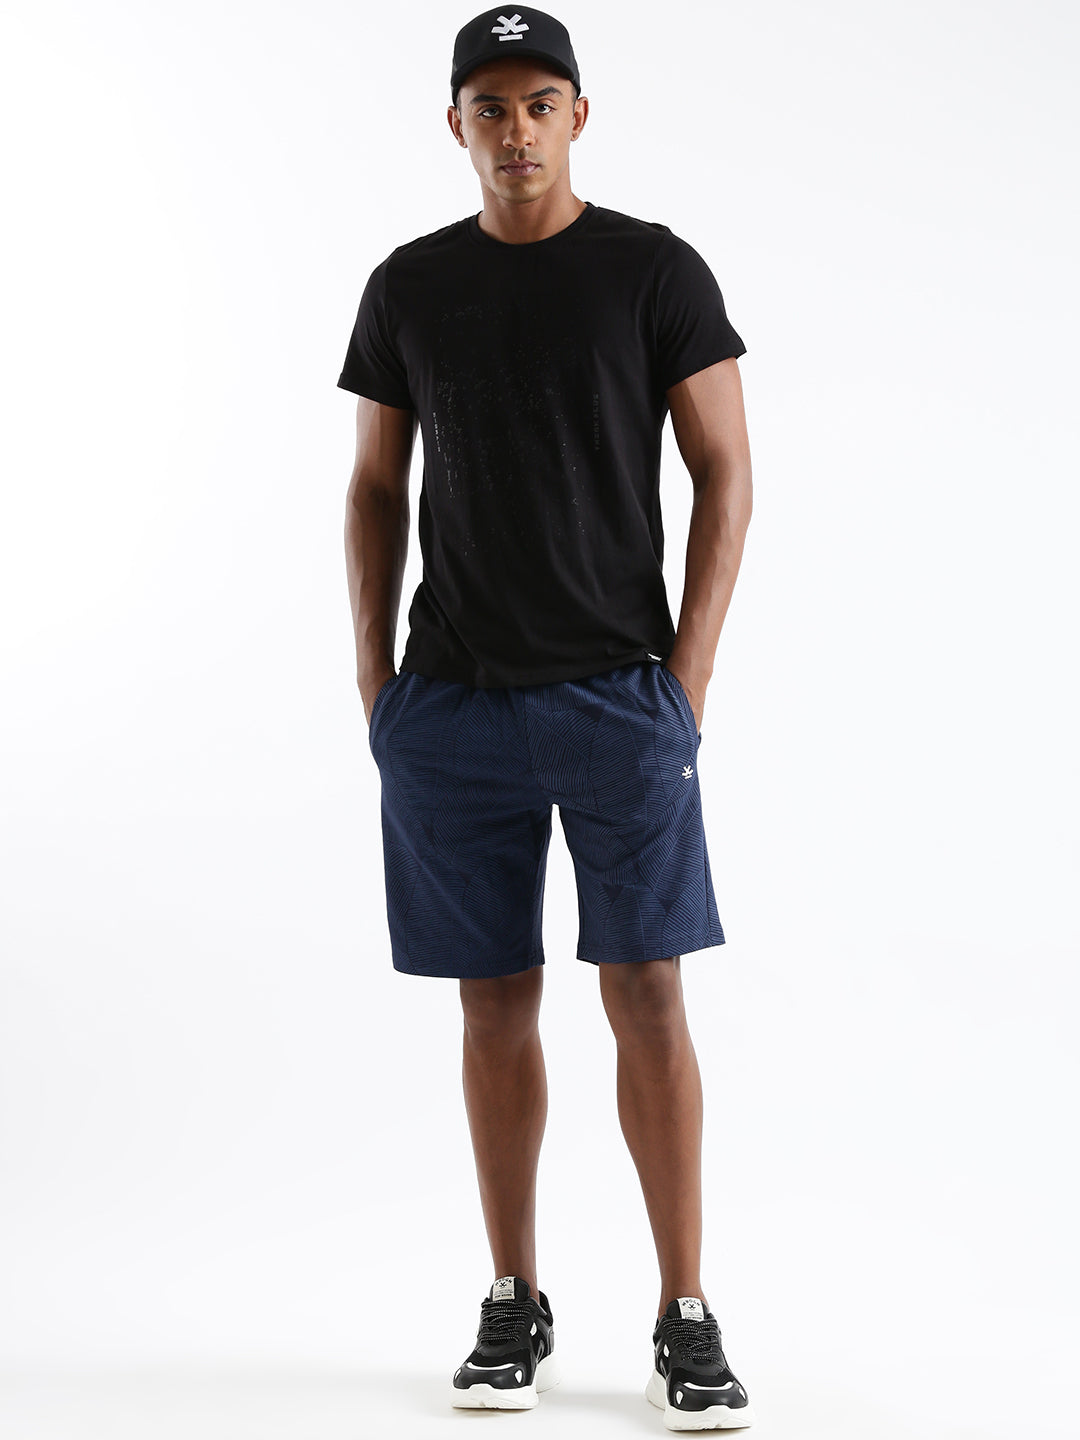 AOP Leafy Lines Printed Shorts